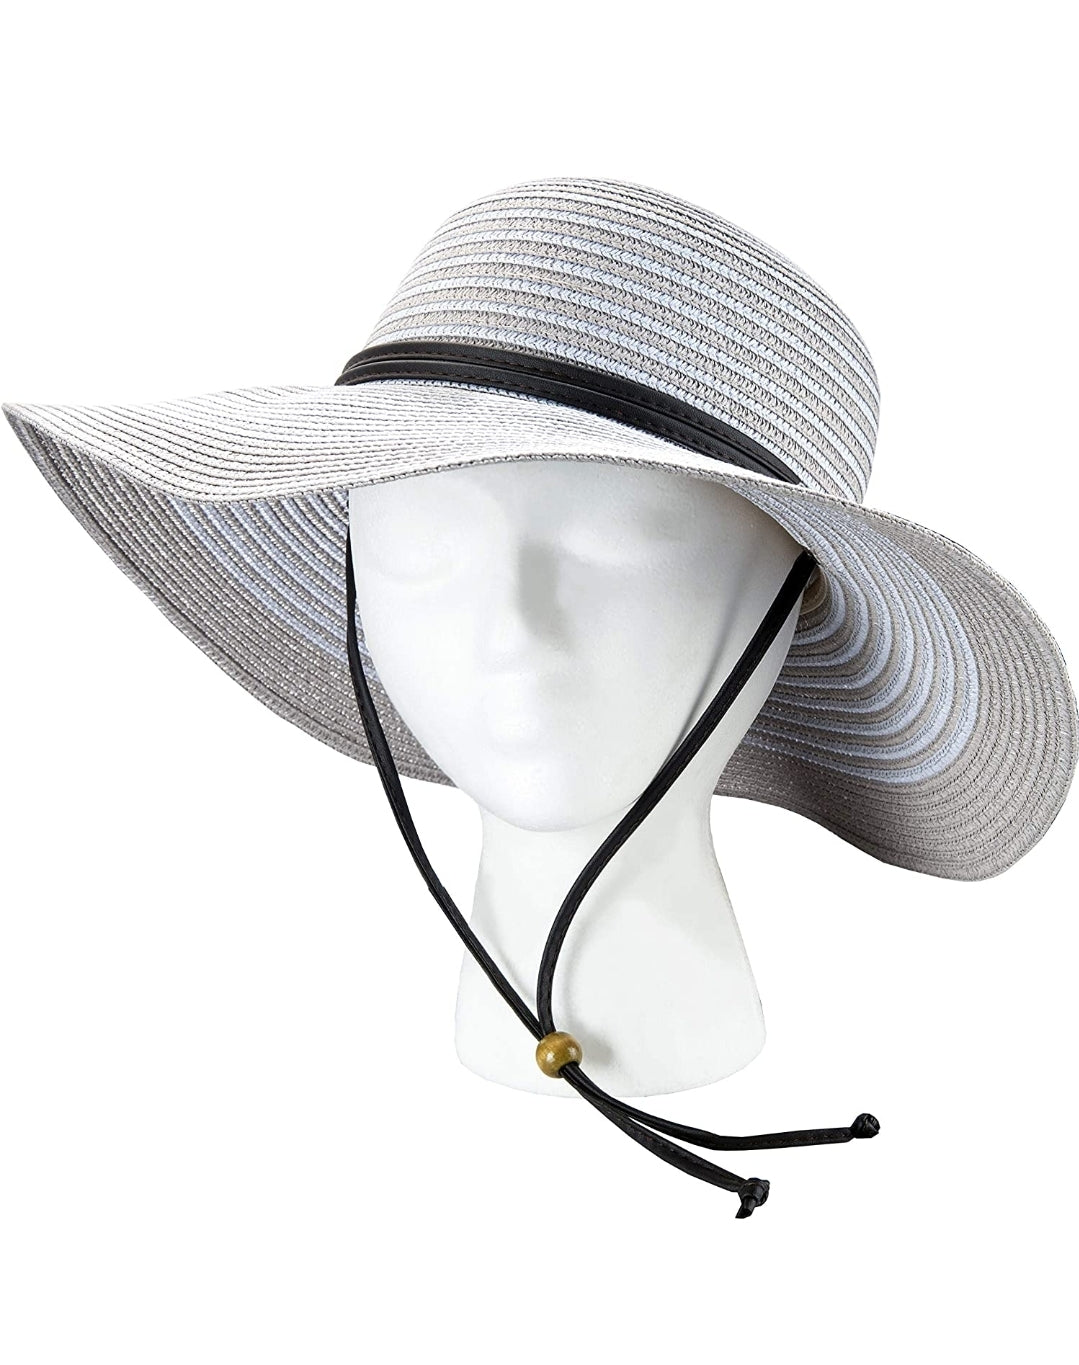 Women's Slogger Braided Hat's, UPF 50+ (Available in Duo Gray or Light Brown